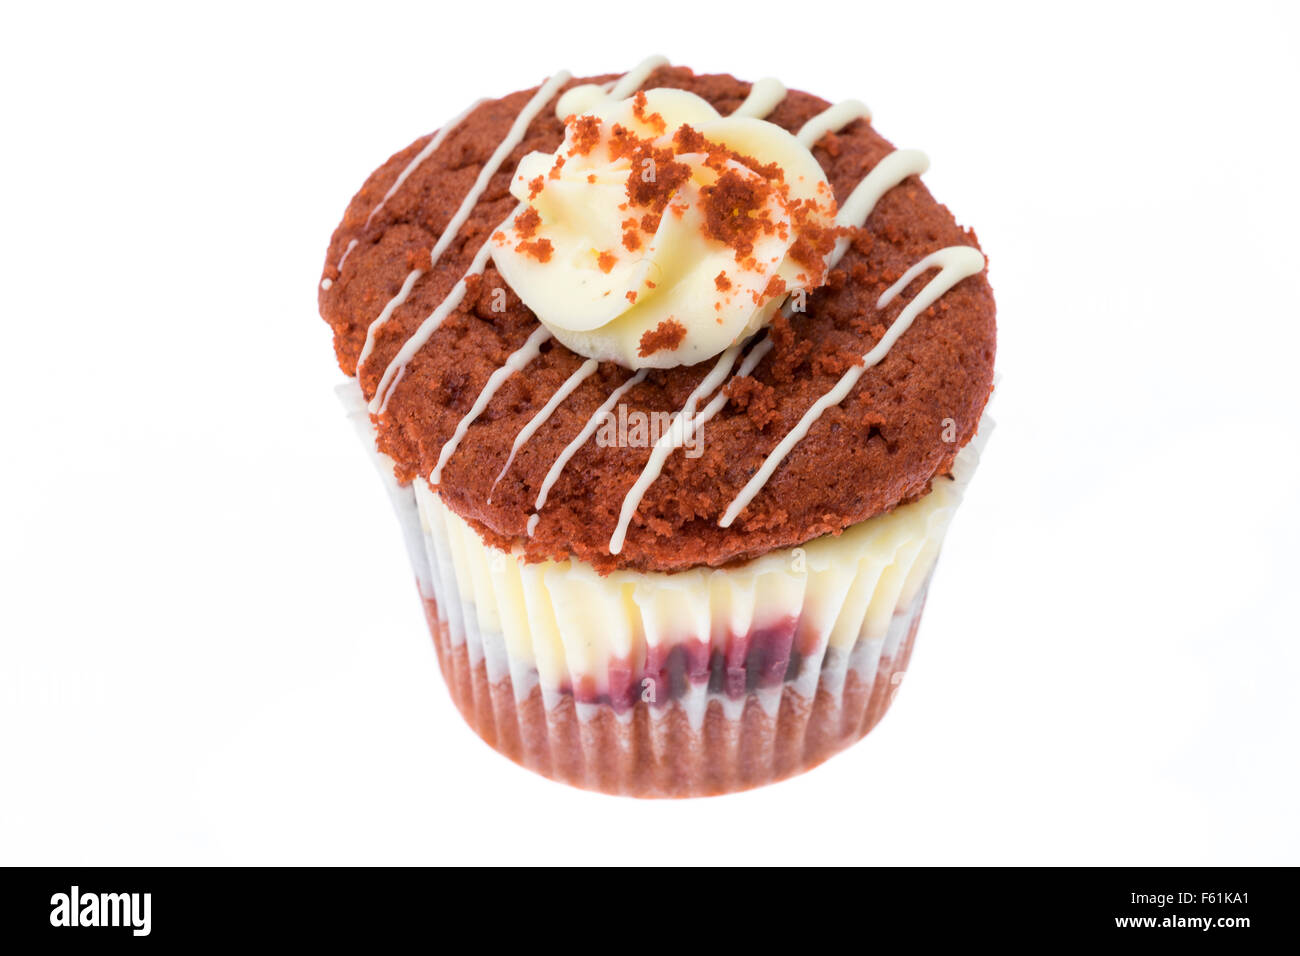 Red Velvet cupcake - studio shot with a white background Stock Photo